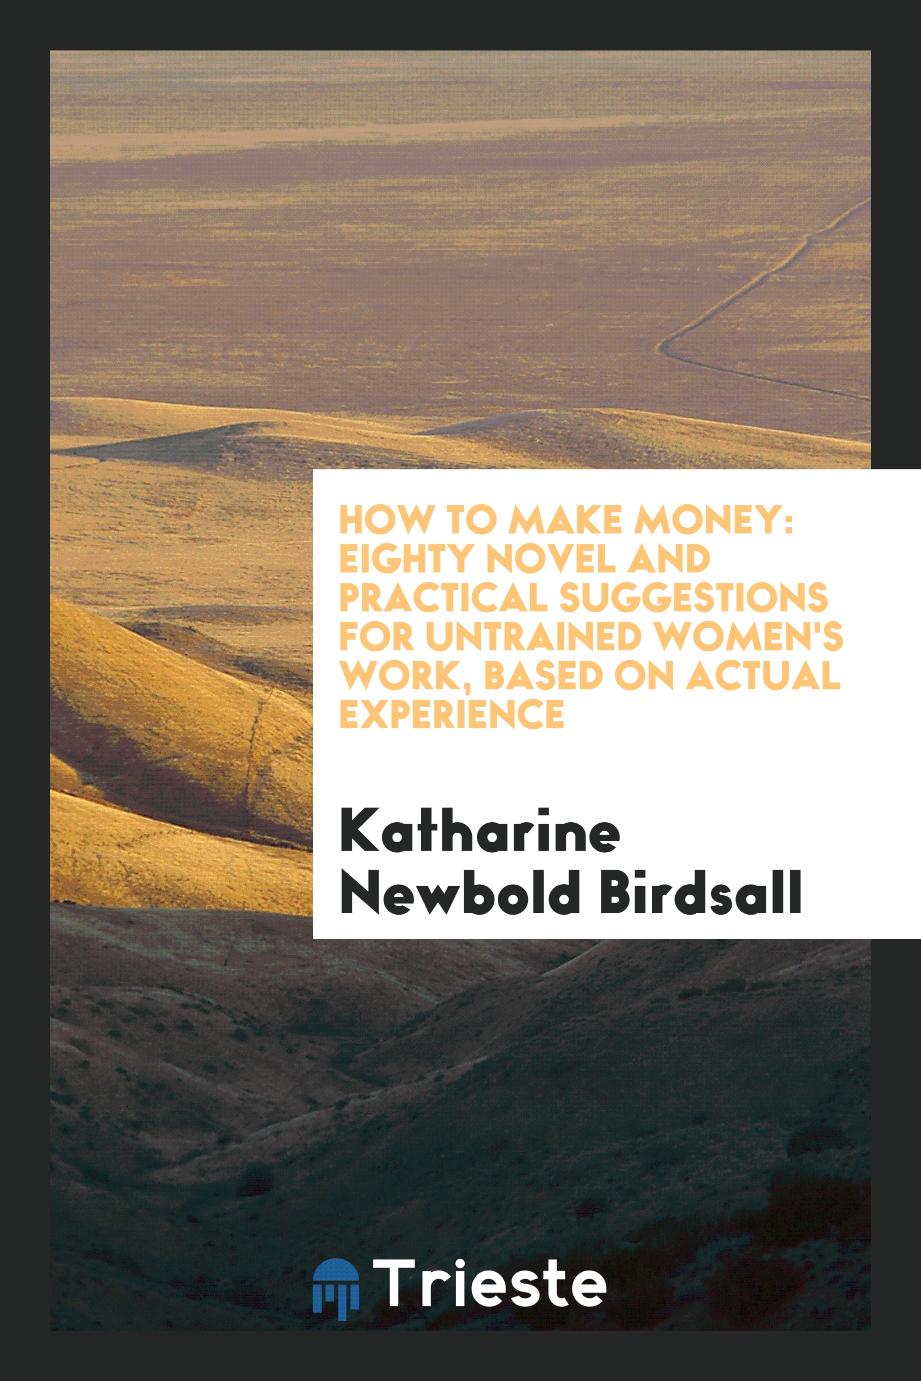 How to Make Money: Eighty Novel and Practical Suggestions for Untrained Women's Work, Based on Actual Experience